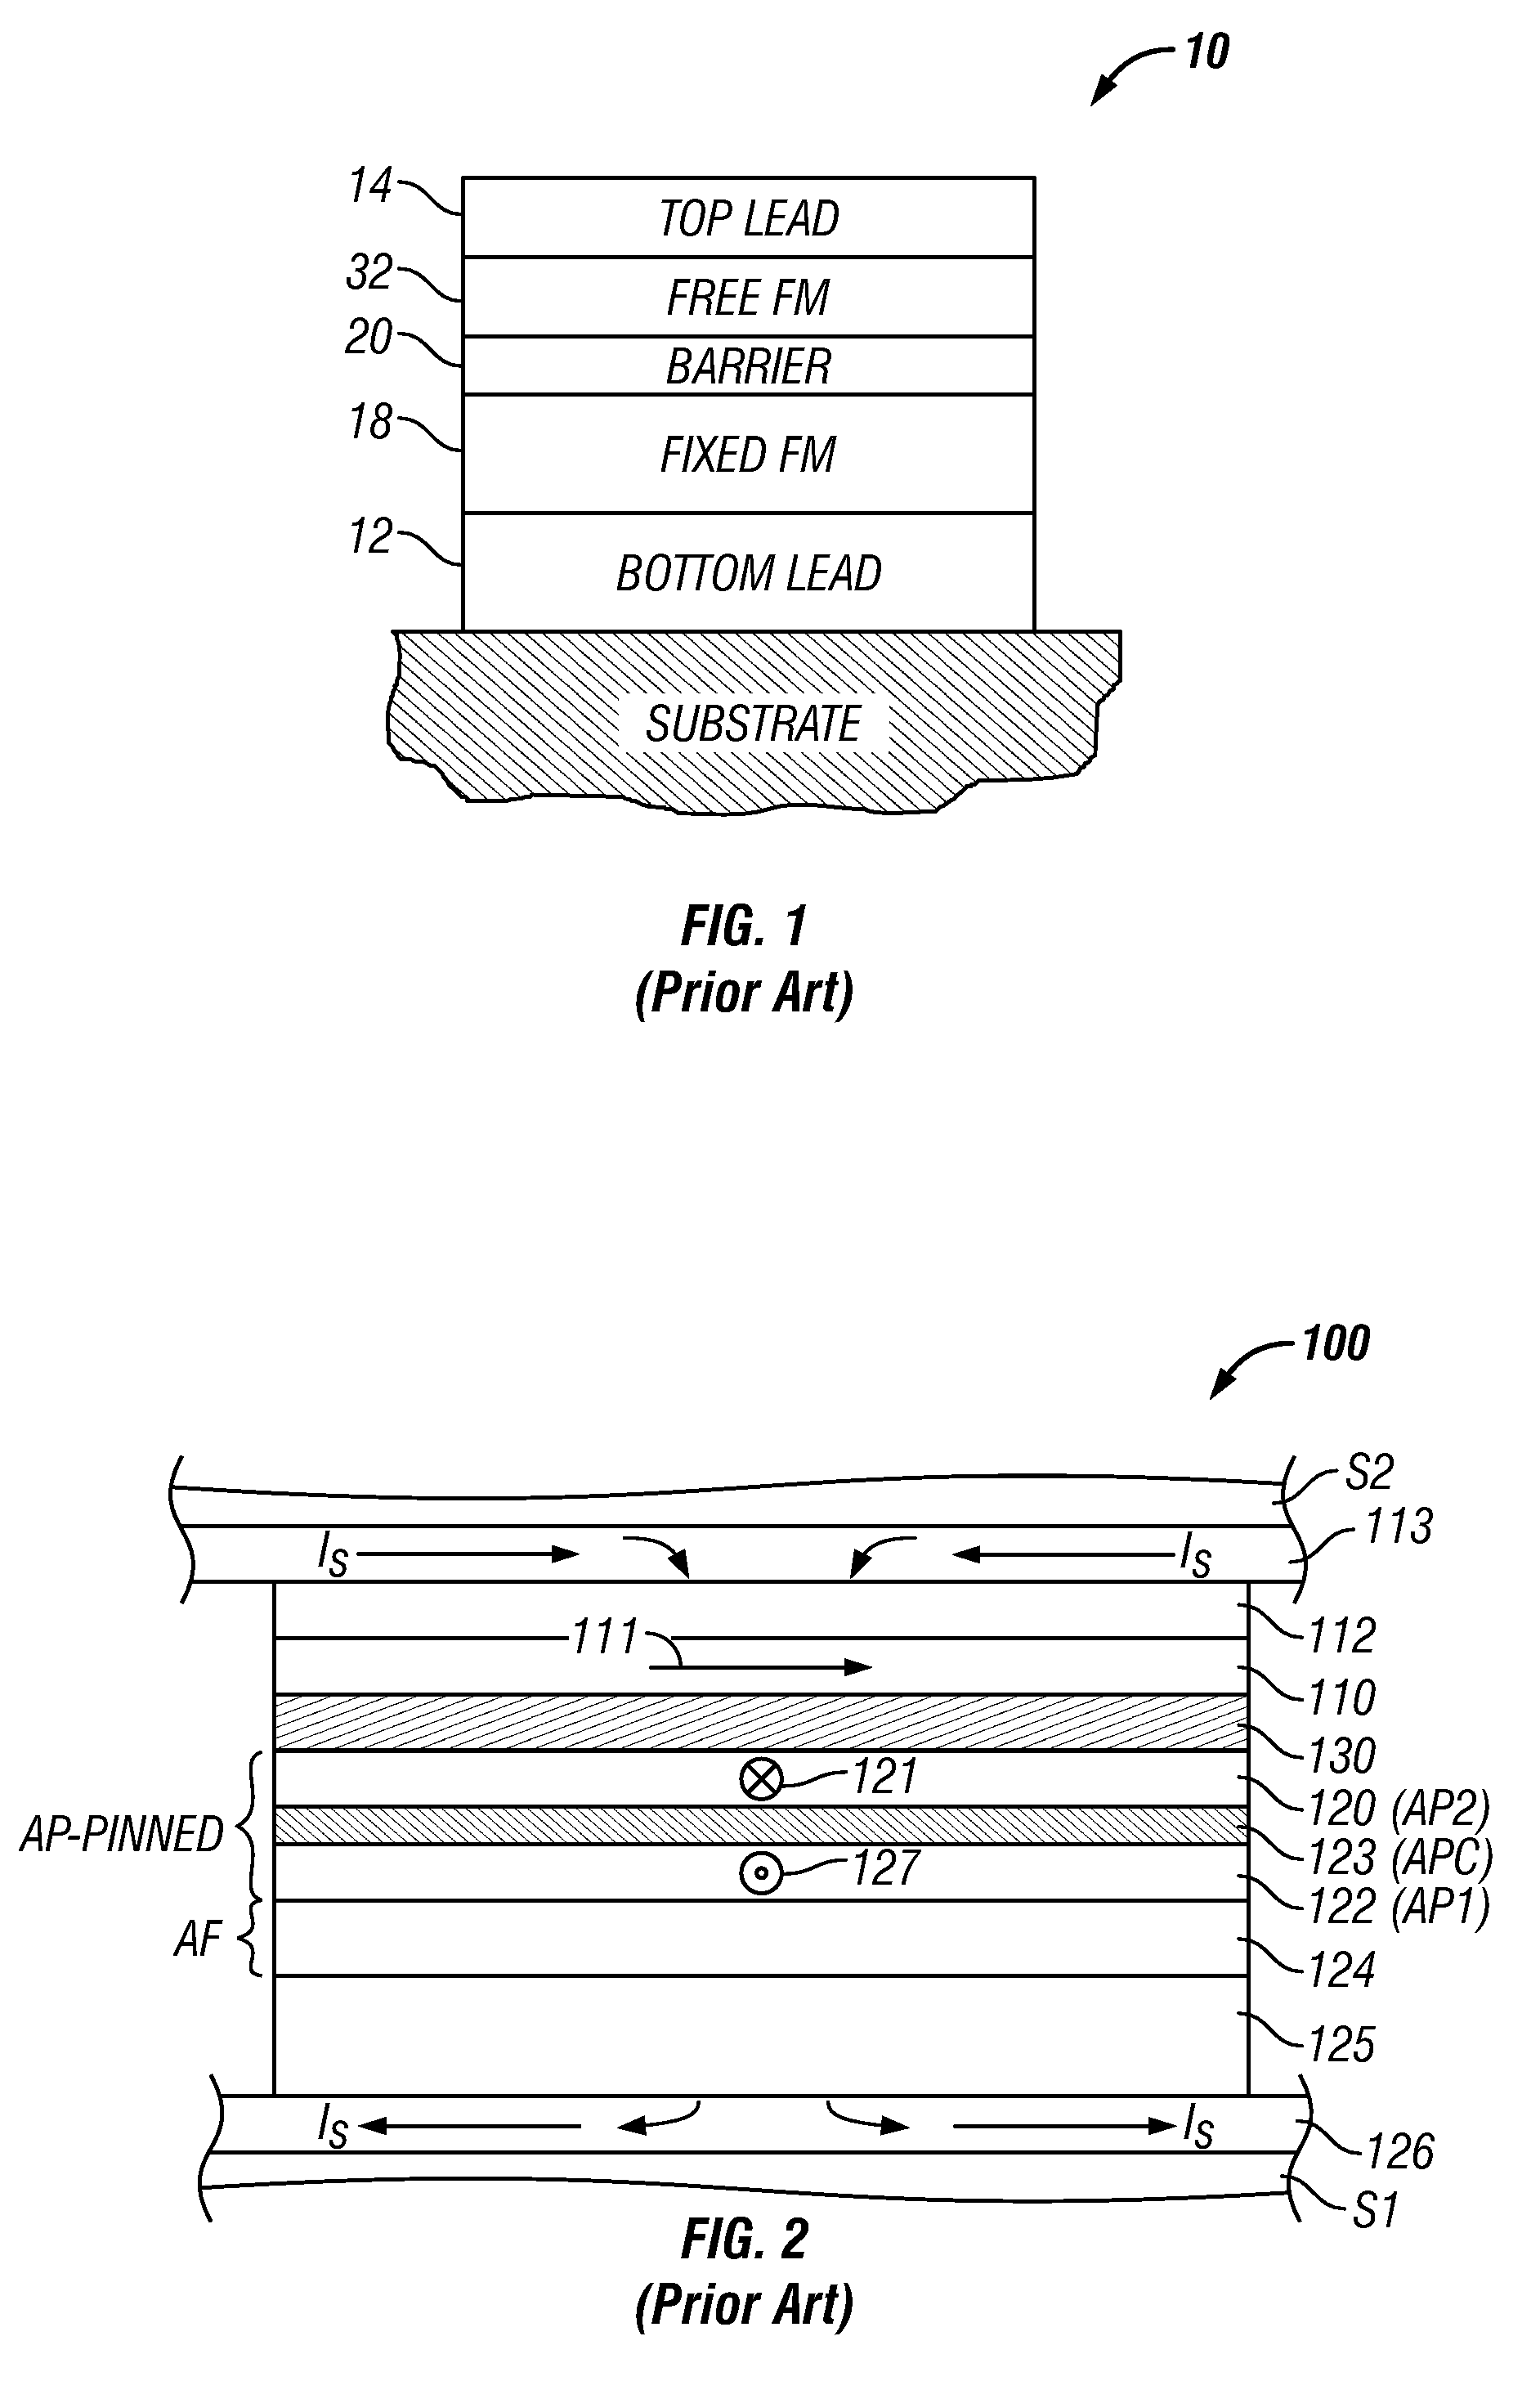 Method for forming an MgO barrier layer in a tunneling magnetoresistive (TMR) device